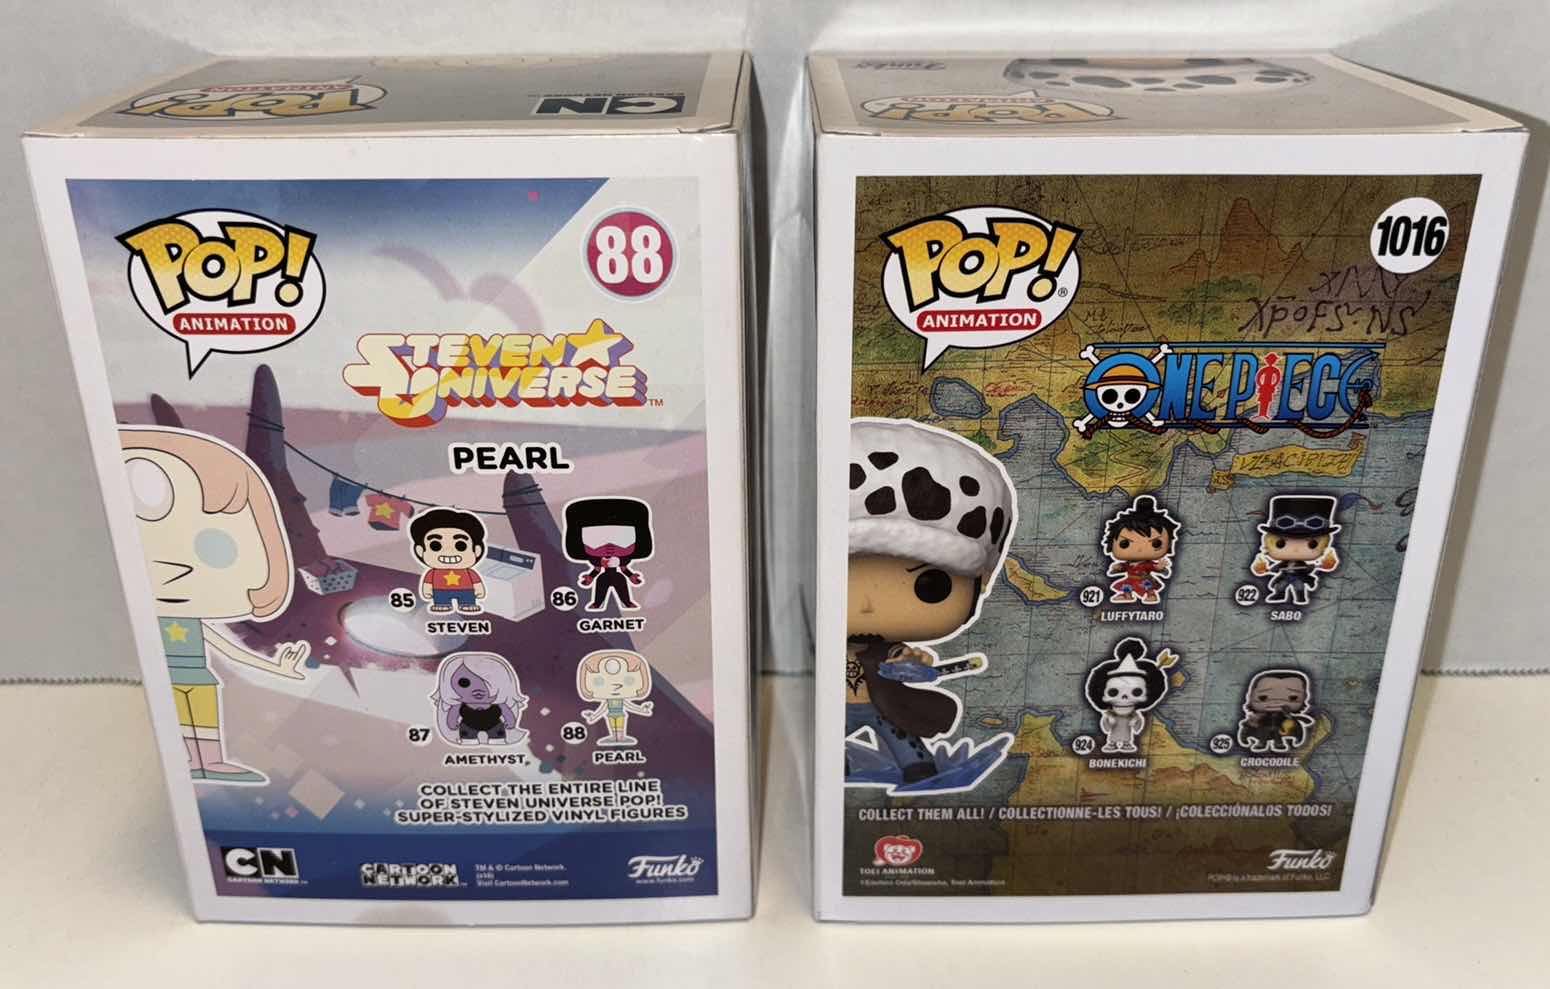 Photo 5 of NEW FUNKO POP! ANIMATION VINYL FIGURE 2-PACK, HOT TOPIC EXCLUSIVE STEVEN UNIVERSE #88 PEARL & AAA ANIME EXCLUSIVE ONE PIECE #1016 TRAFALGAR LAW